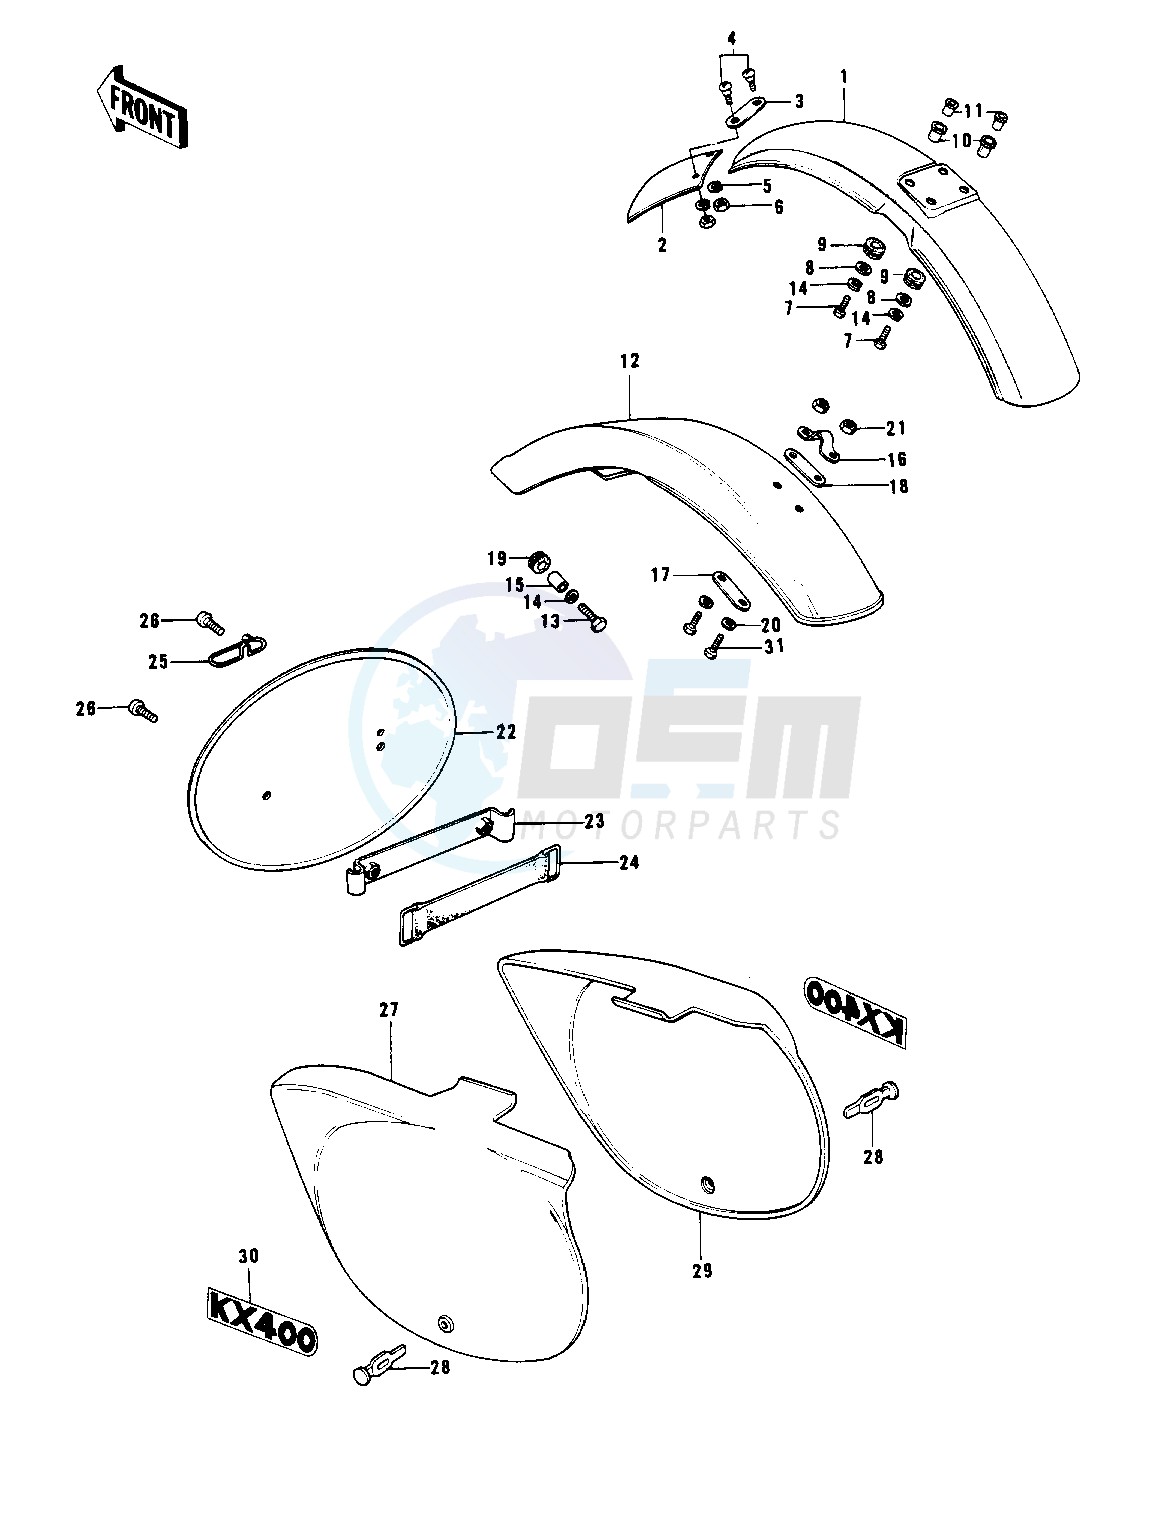 FENDERS_SIDE COVERS_NUMBER PLATE blueprint